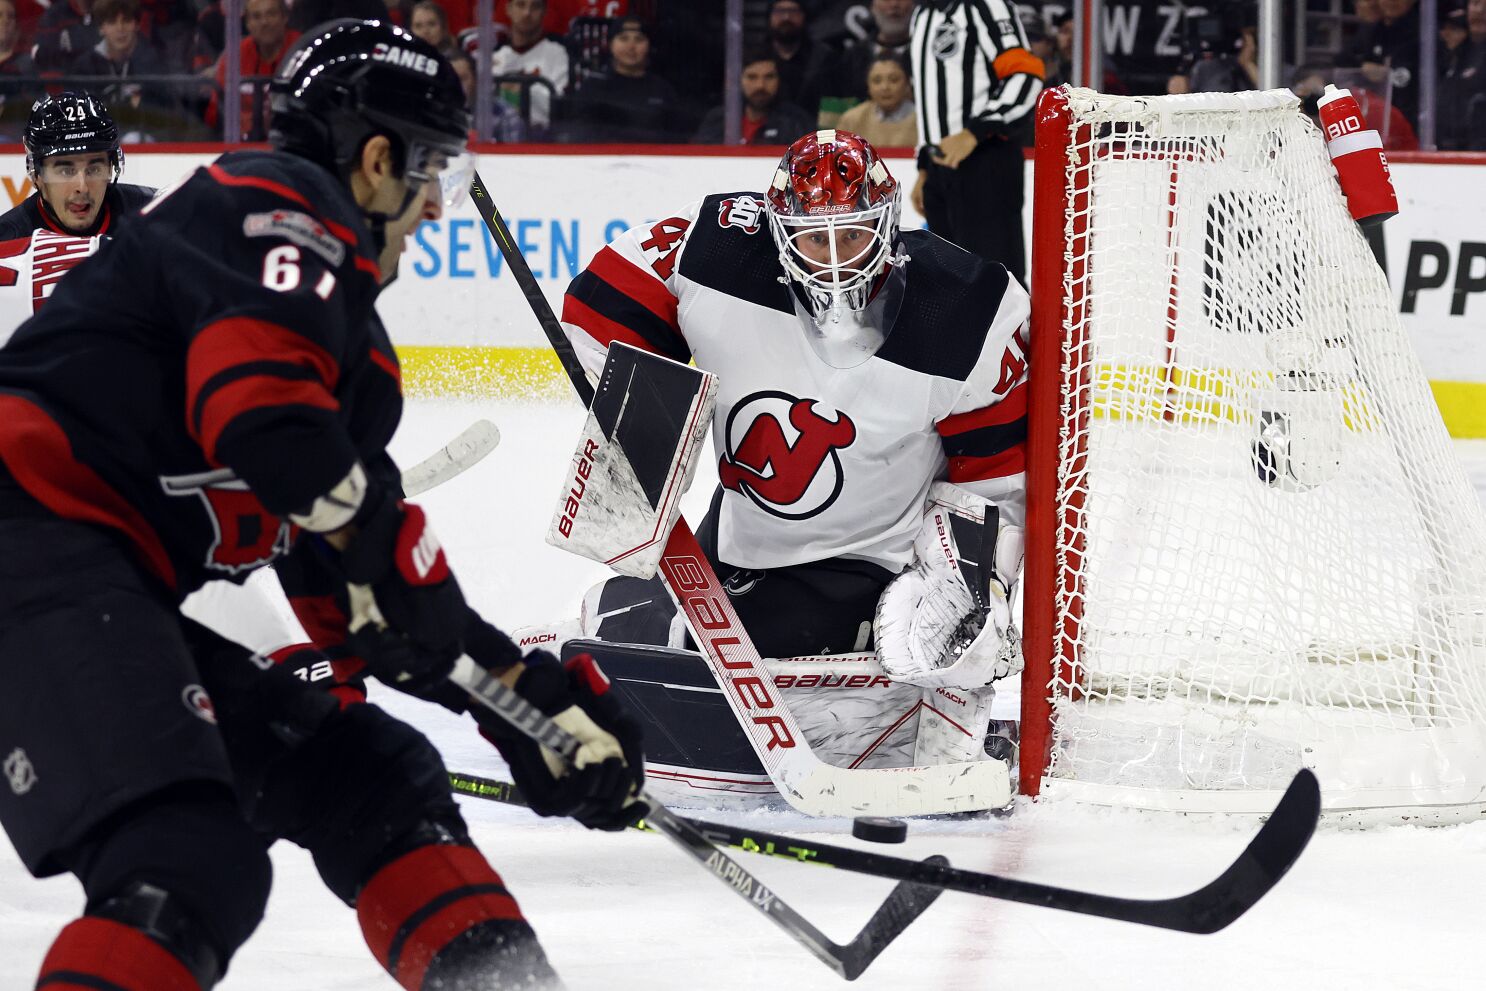 Mercer has goal, 3 assists as Devils beat Avalanche 7-5